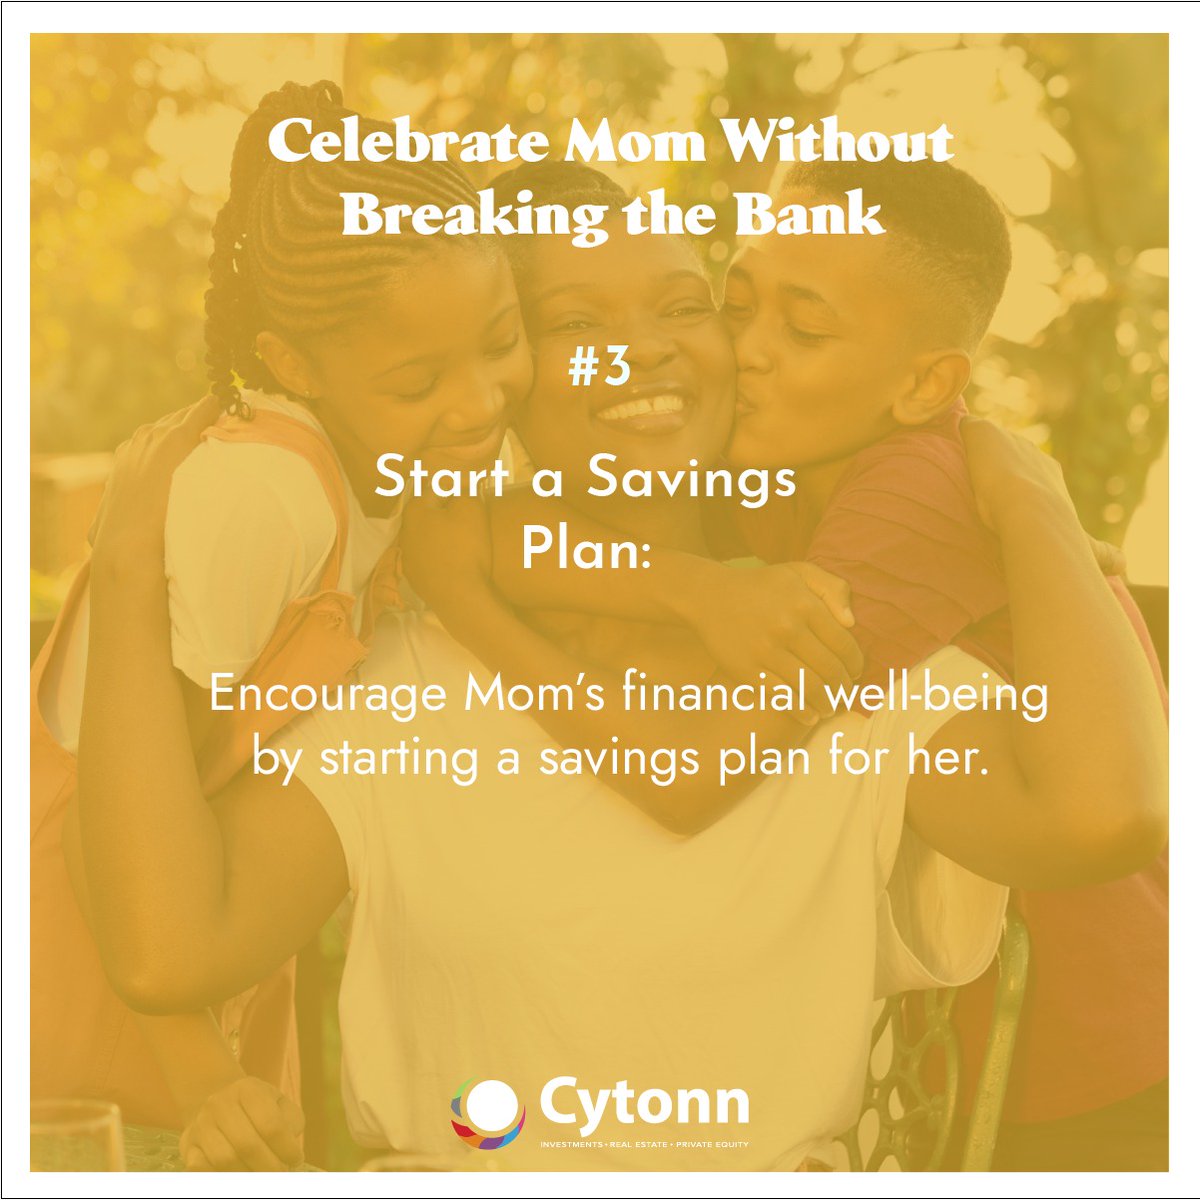 Good morning!
Start Mom's day right by planning her financial future with a savings plan.

Start today through clients.cytonn.com/apply/investme…

#FinancialWellness